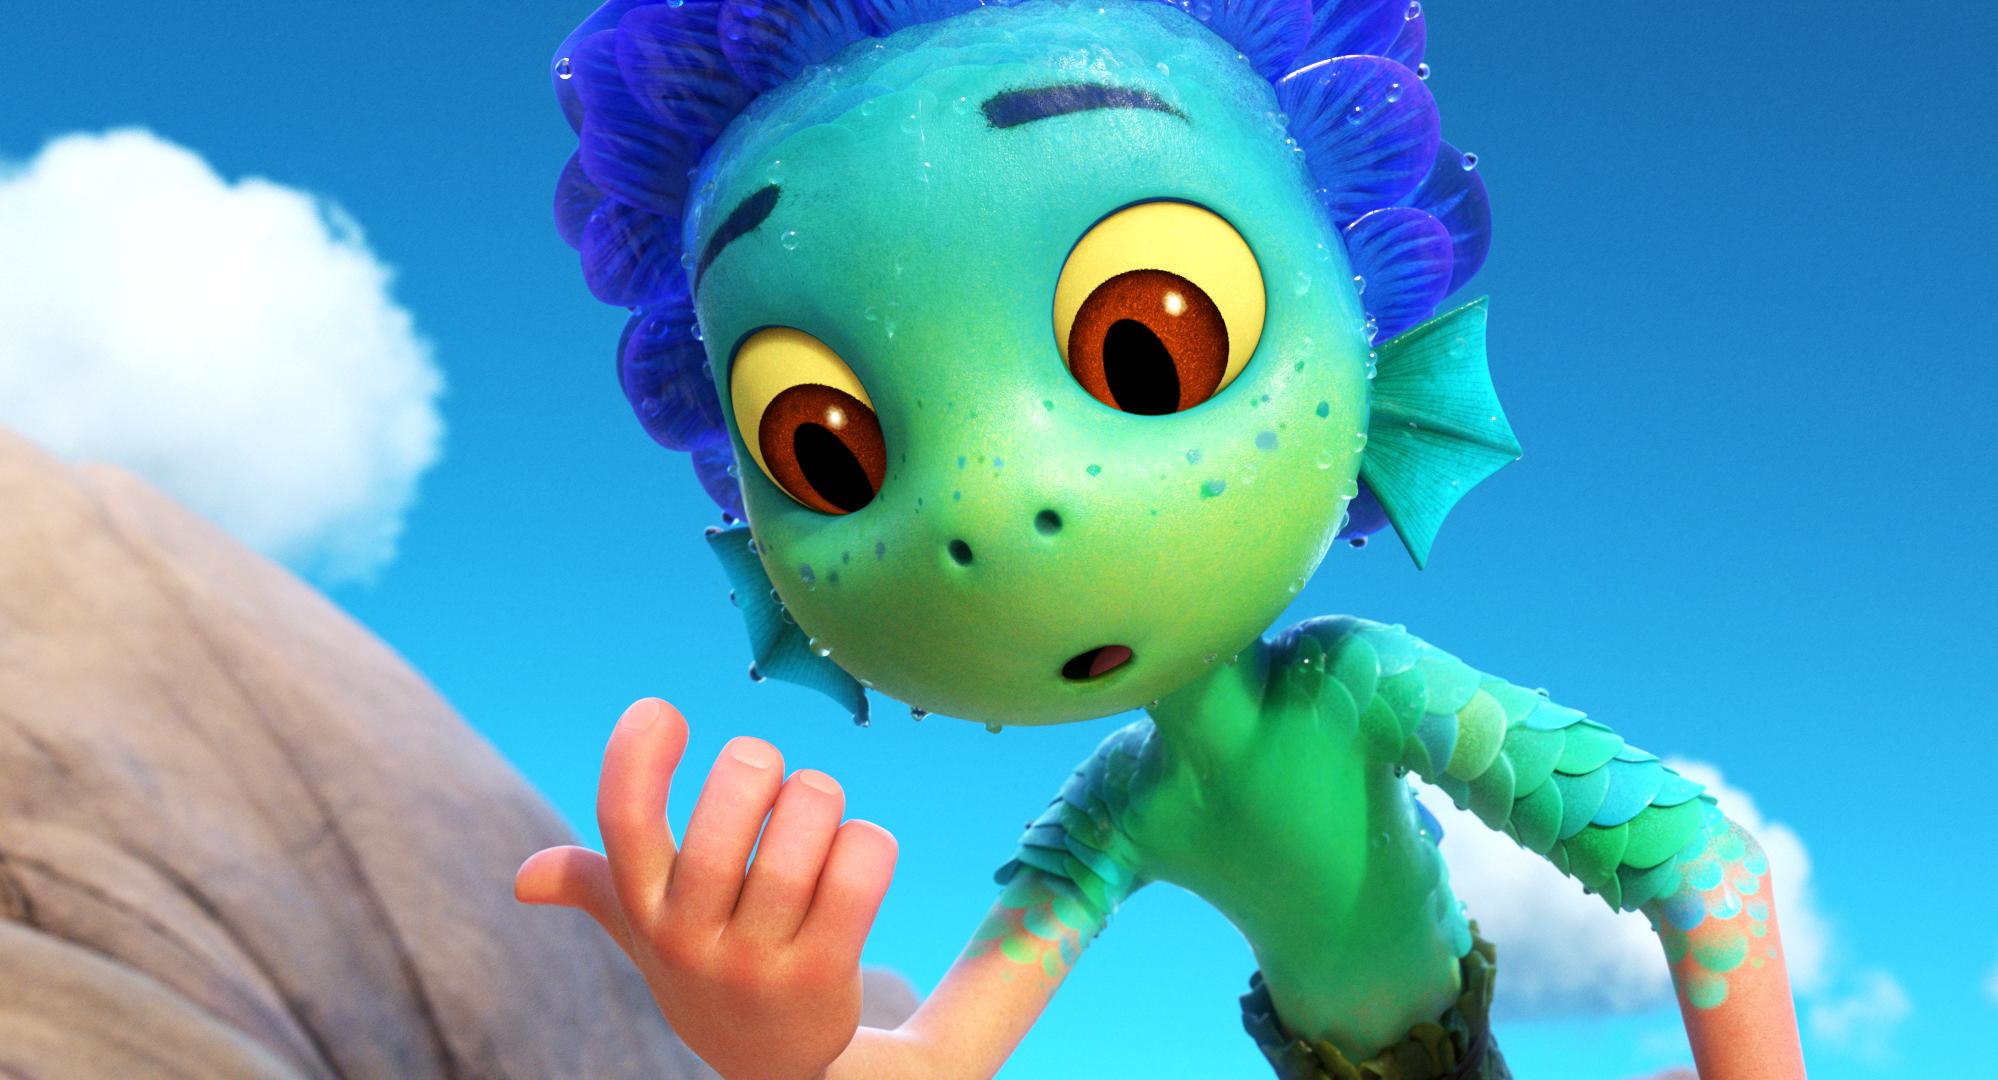 Meet Luca Your Bright Eyed Companion In Disney/Pixar’s Next Feature Film